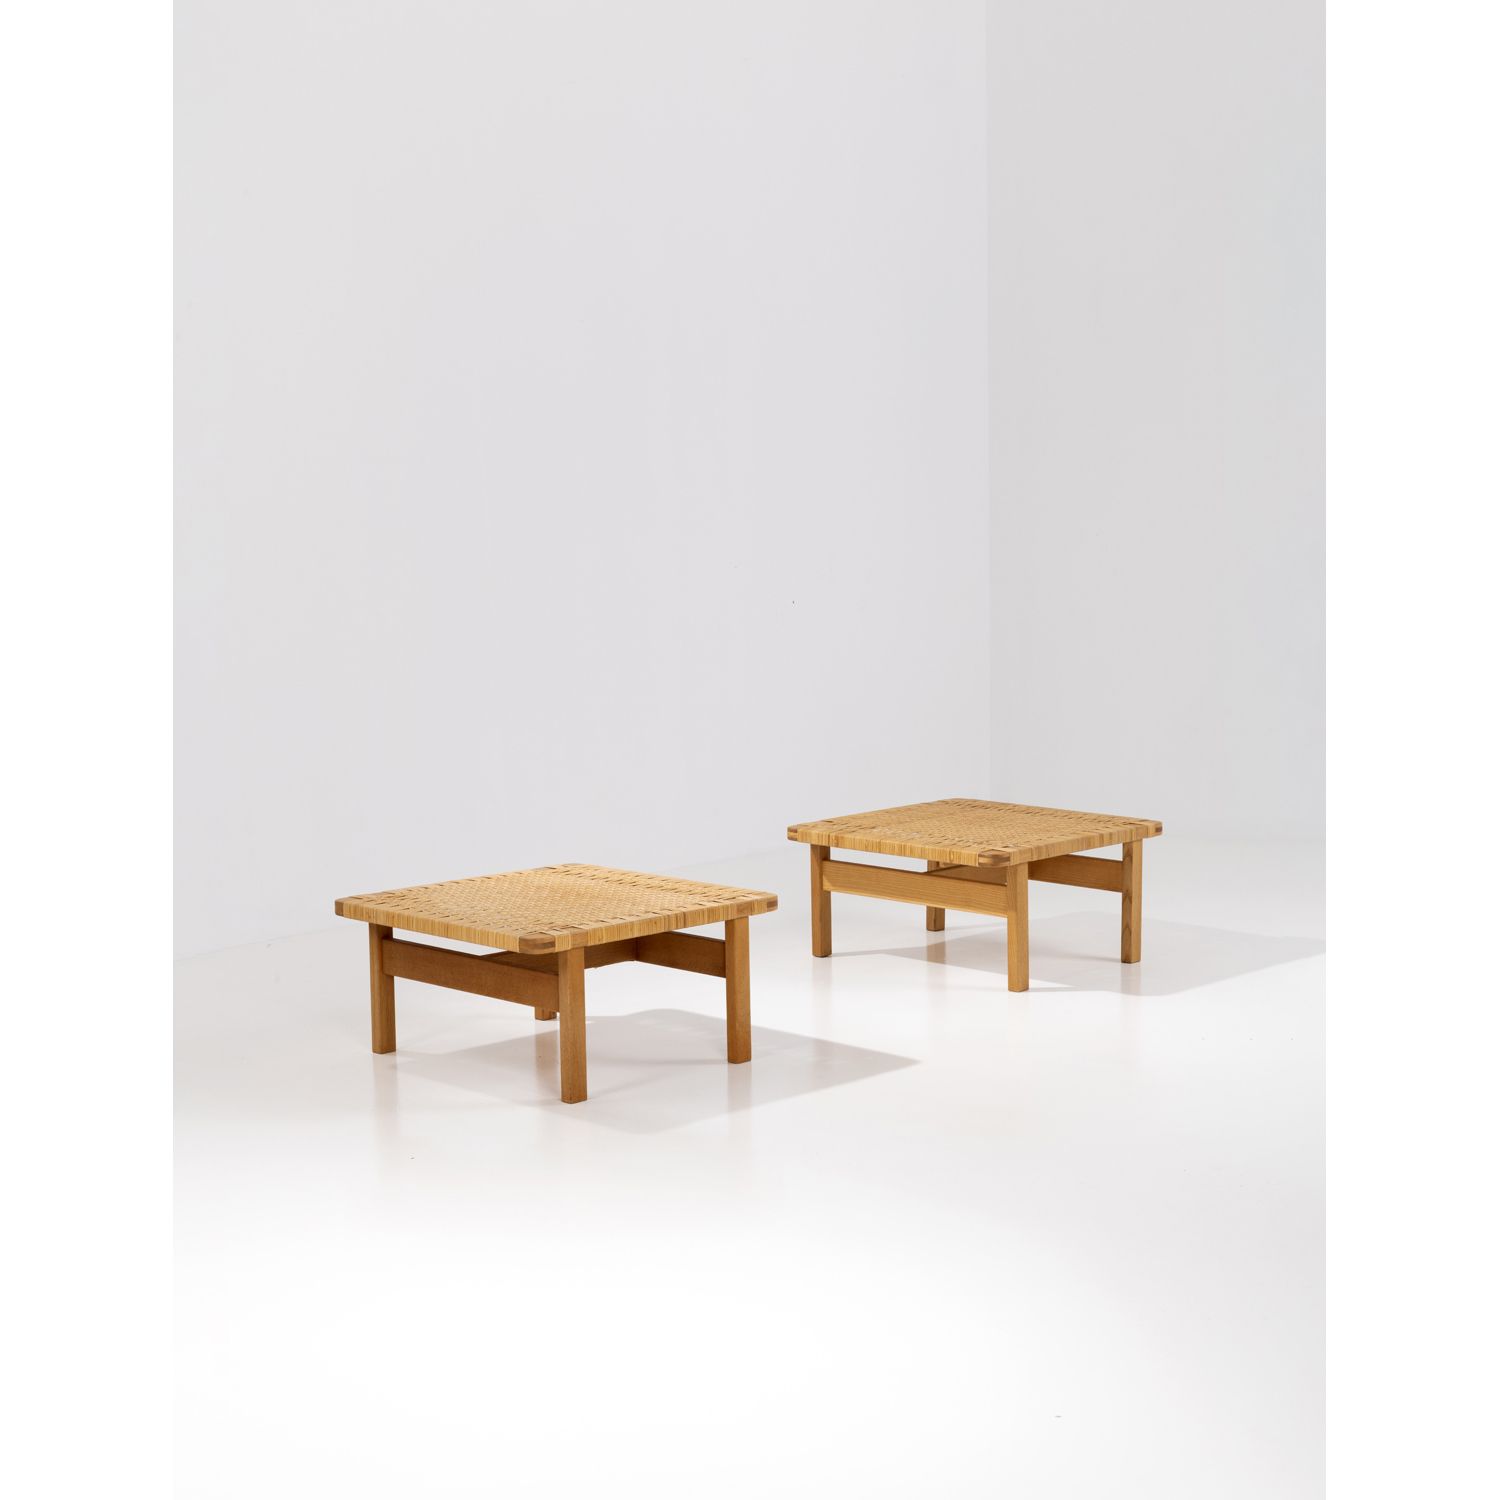 Null Børge Mogensen (1914-1972)

Pair of stools

Oak wood and caning

Edited by &hellip;